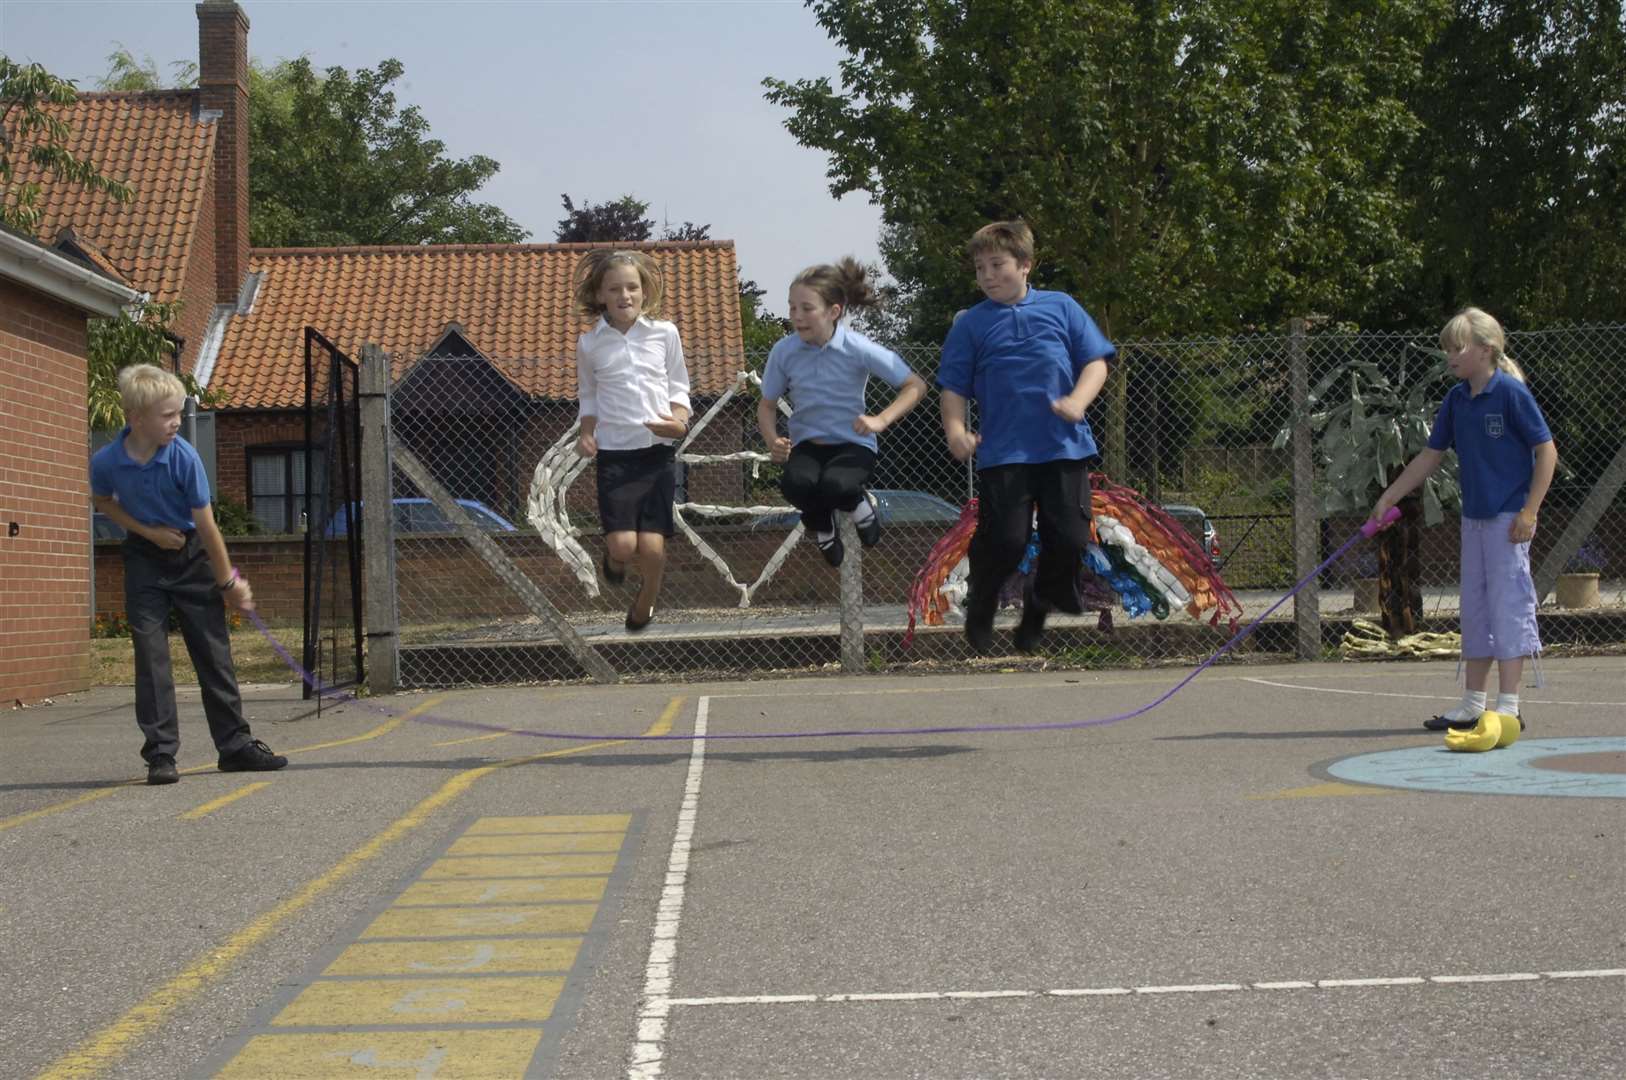 Skipping in the playground or the school hall